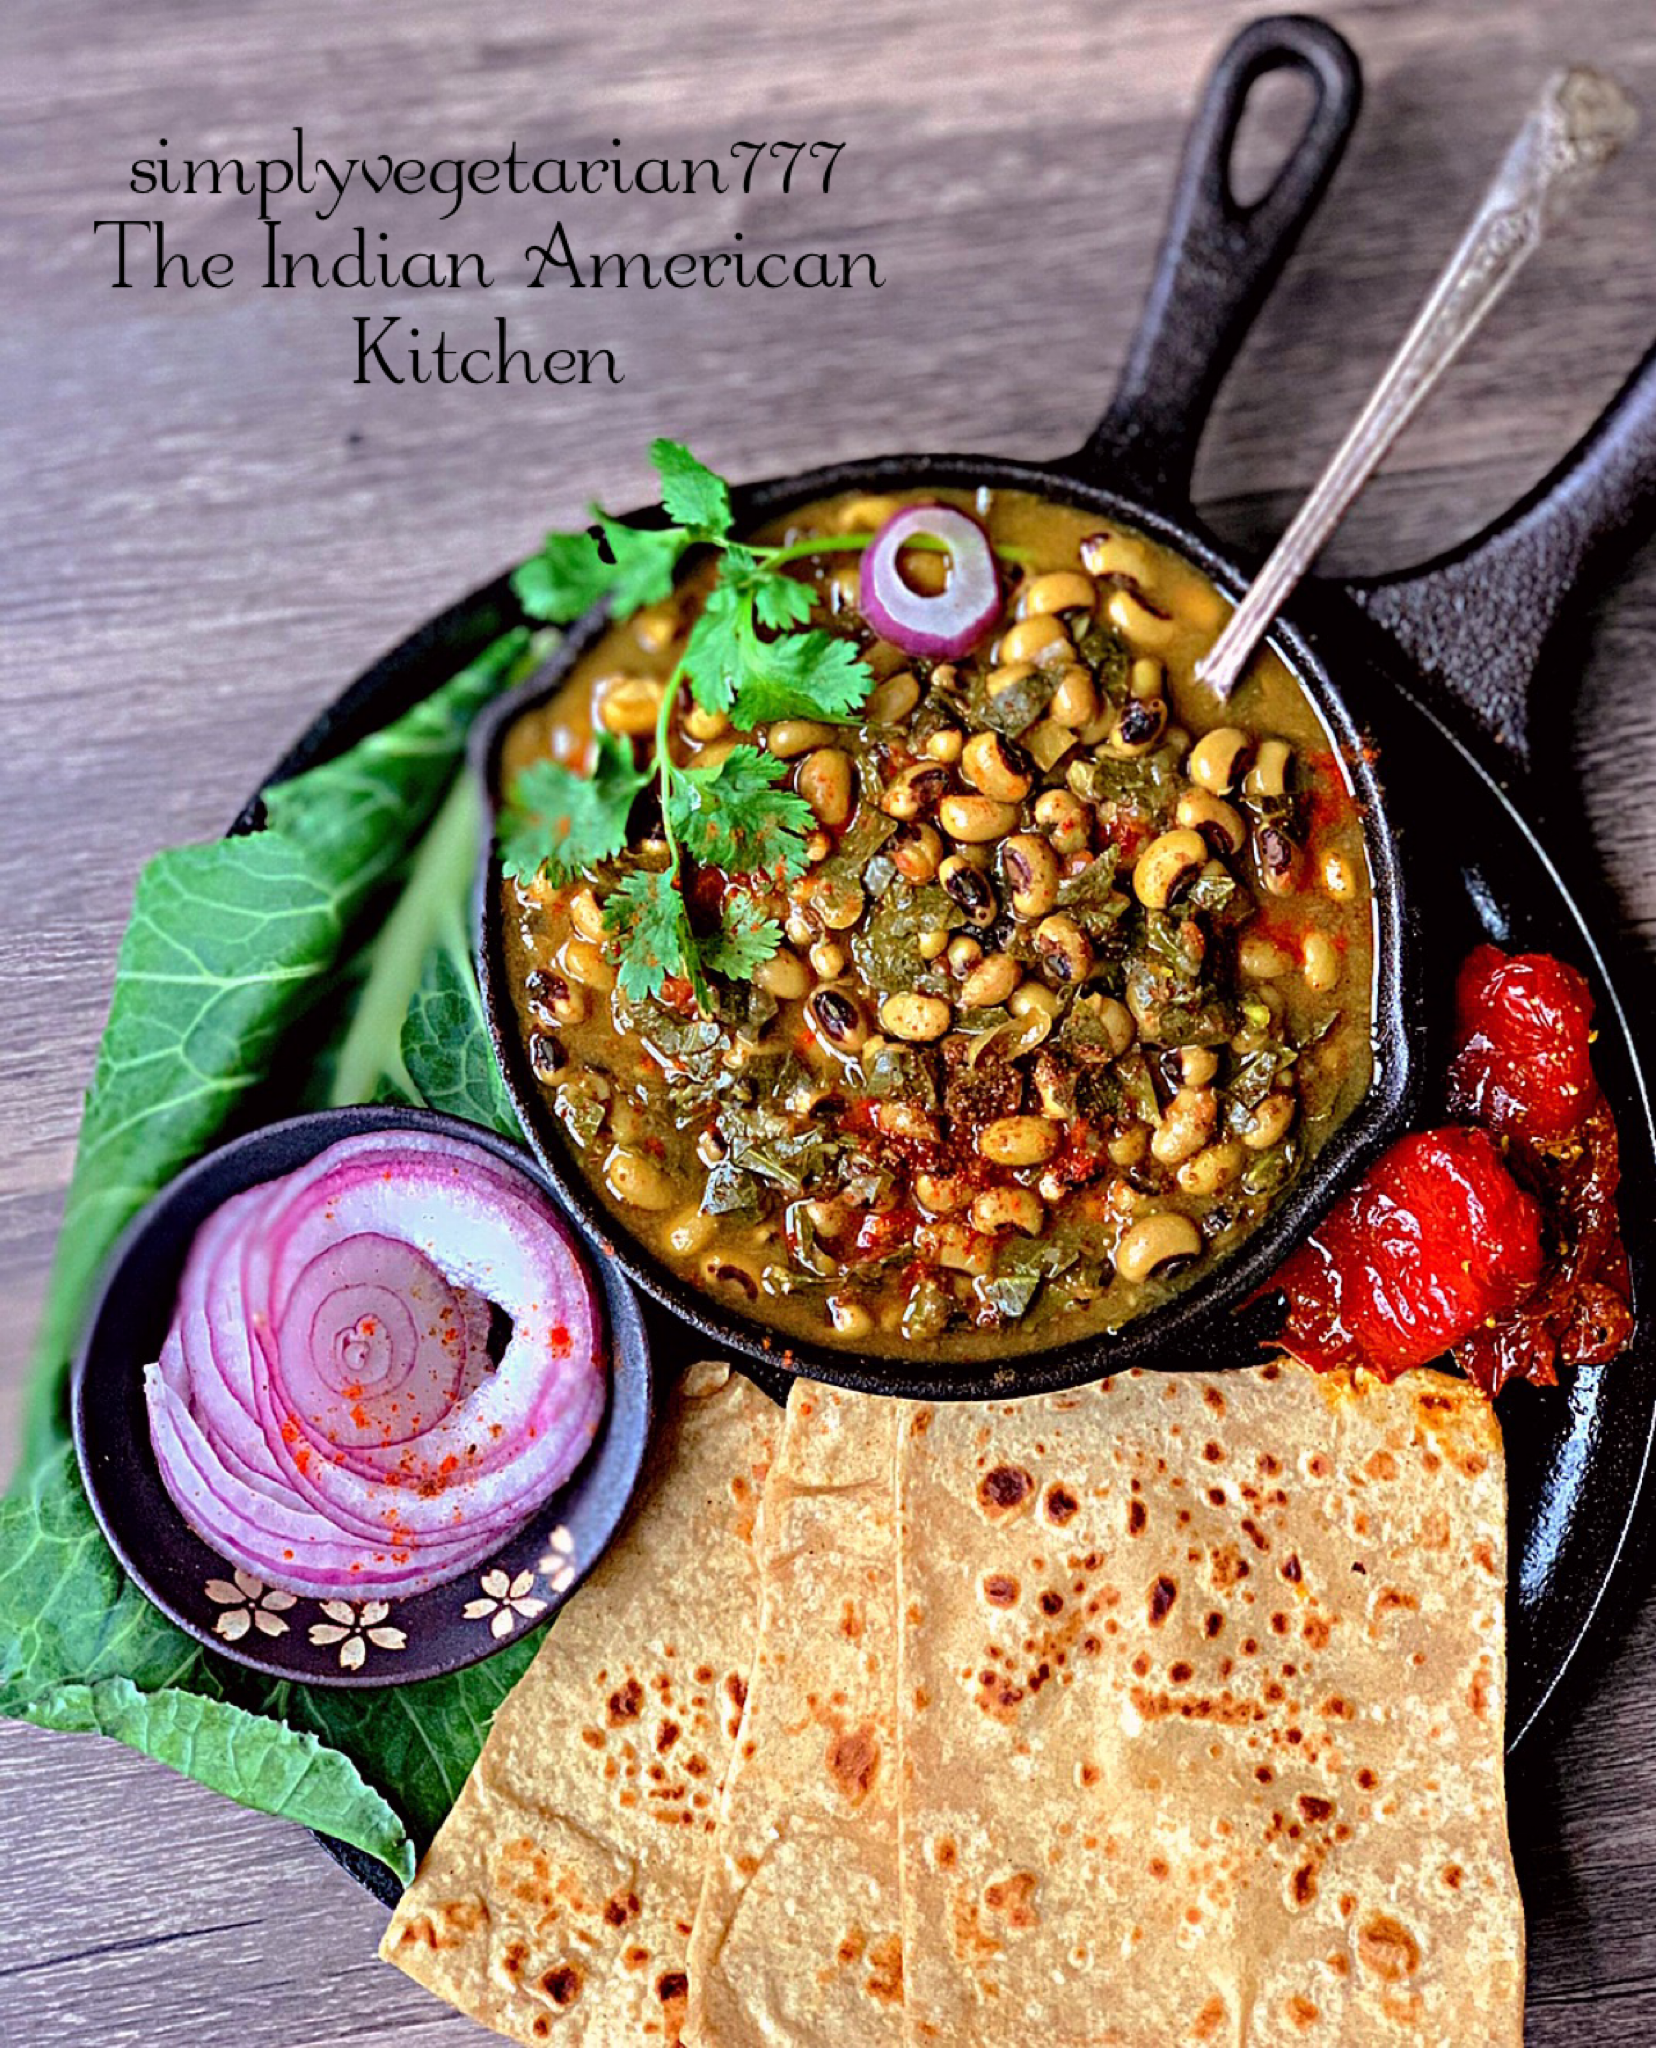 Black Eyed Peas Curry is a super delicious curry made in Instant Pot. It is a vegan and glutenfree stew. Warm Indian Spices make it perfect for any season. #collardgreensbeans #instantpotbeans #instantpotvegetarian #instantpotrecipes #blackeyedpeascollardgreens #newyearsbeansandgreens #blackeyedpeascurry #instantpotstew